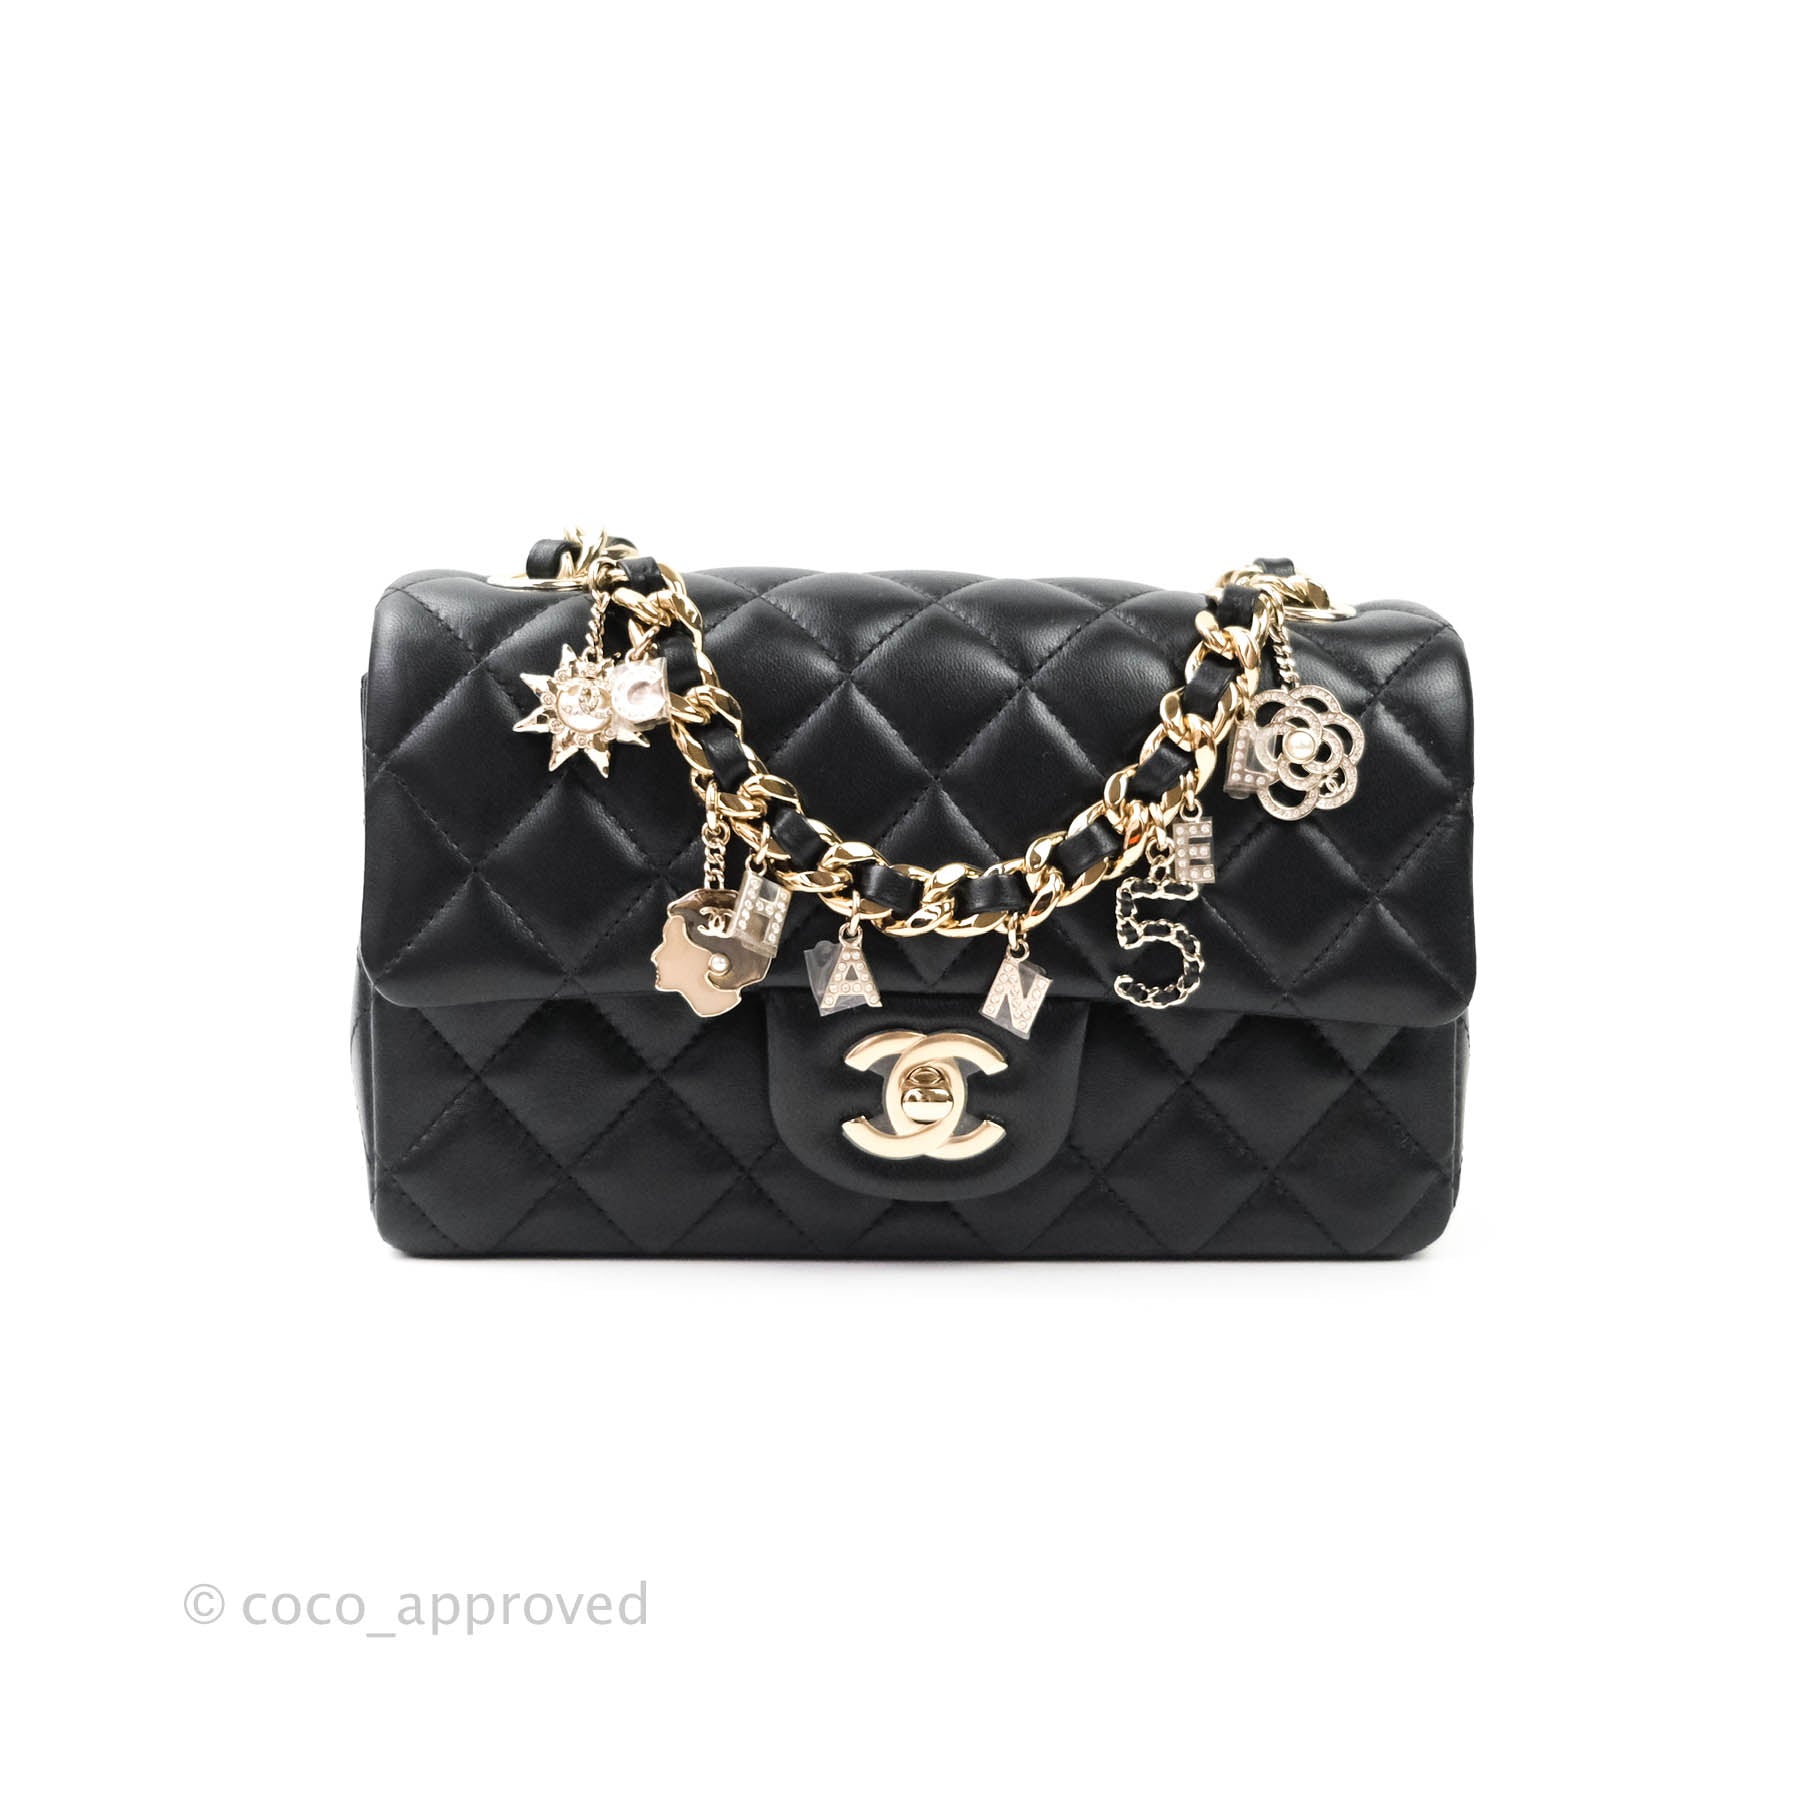 Chanel Black Choco Quilted Satin Extra Mini Lipstick Charm Bag Chanel